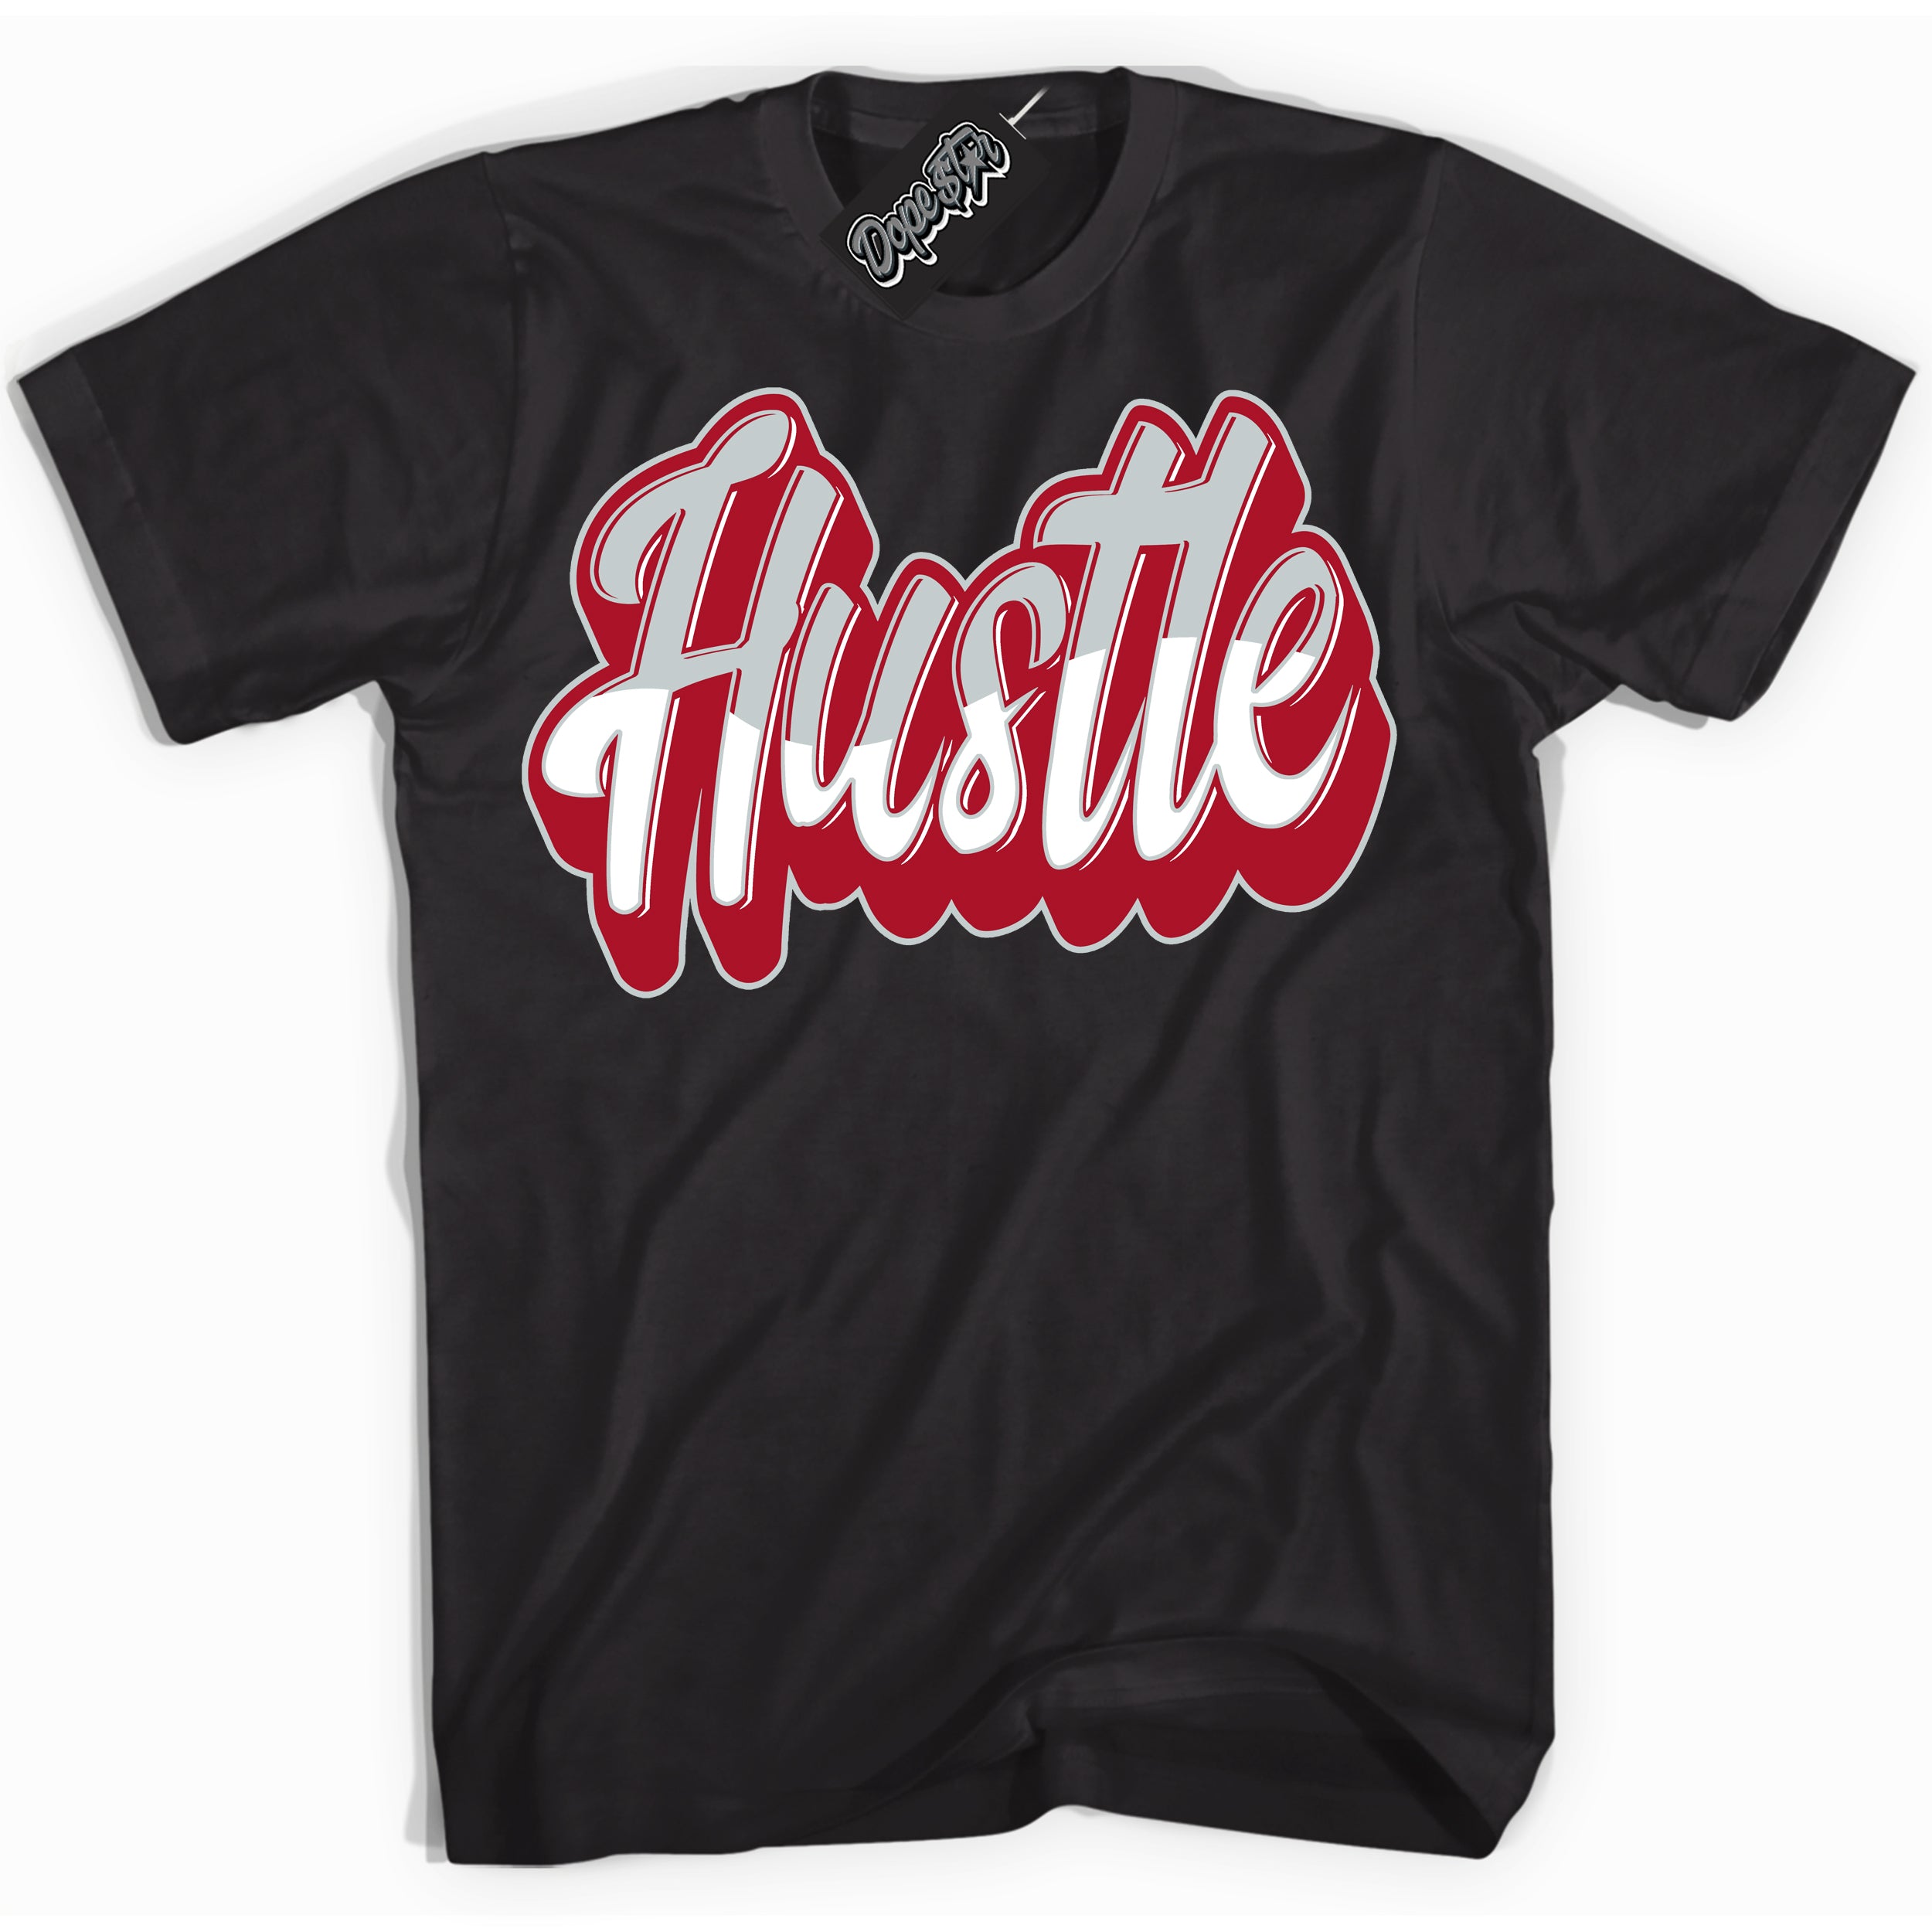 Cool Black Shirt with “ Hustle” design that perfectly matches Reverse Ultraman Sneakers.